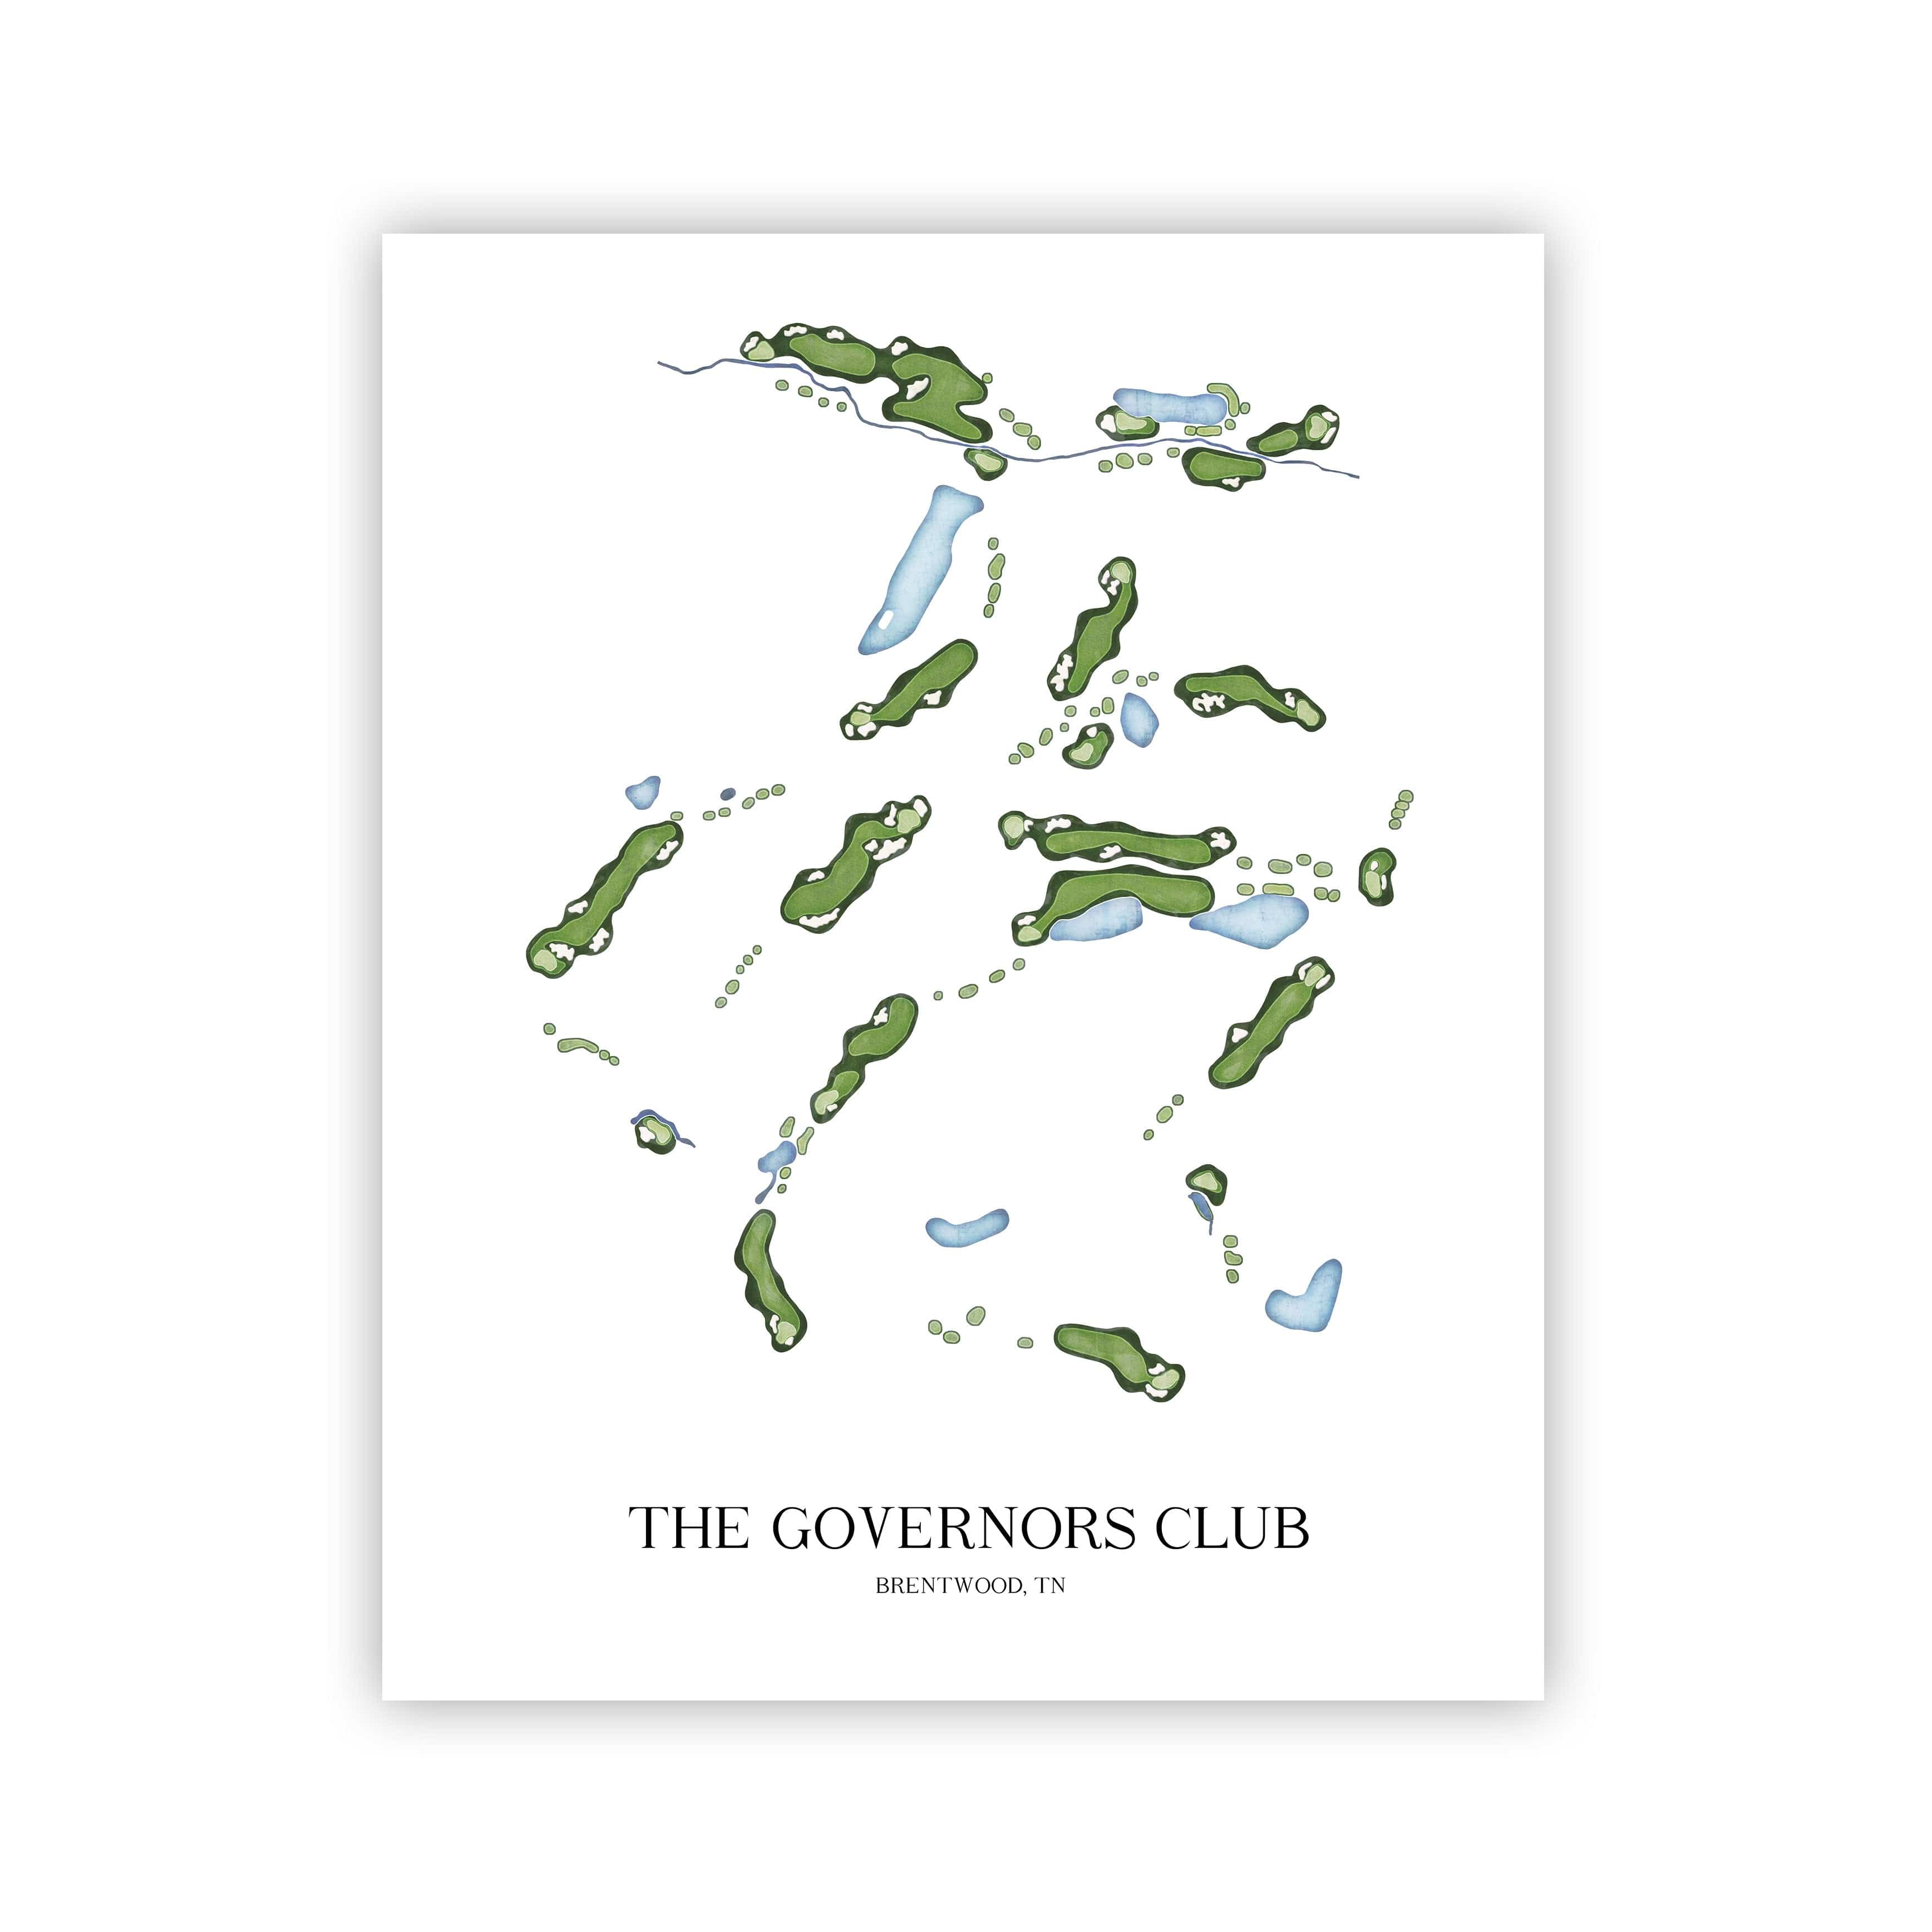 The 19th Hole Golf Shop - Golf Course Prints -  The Governors Club Golf Course Map